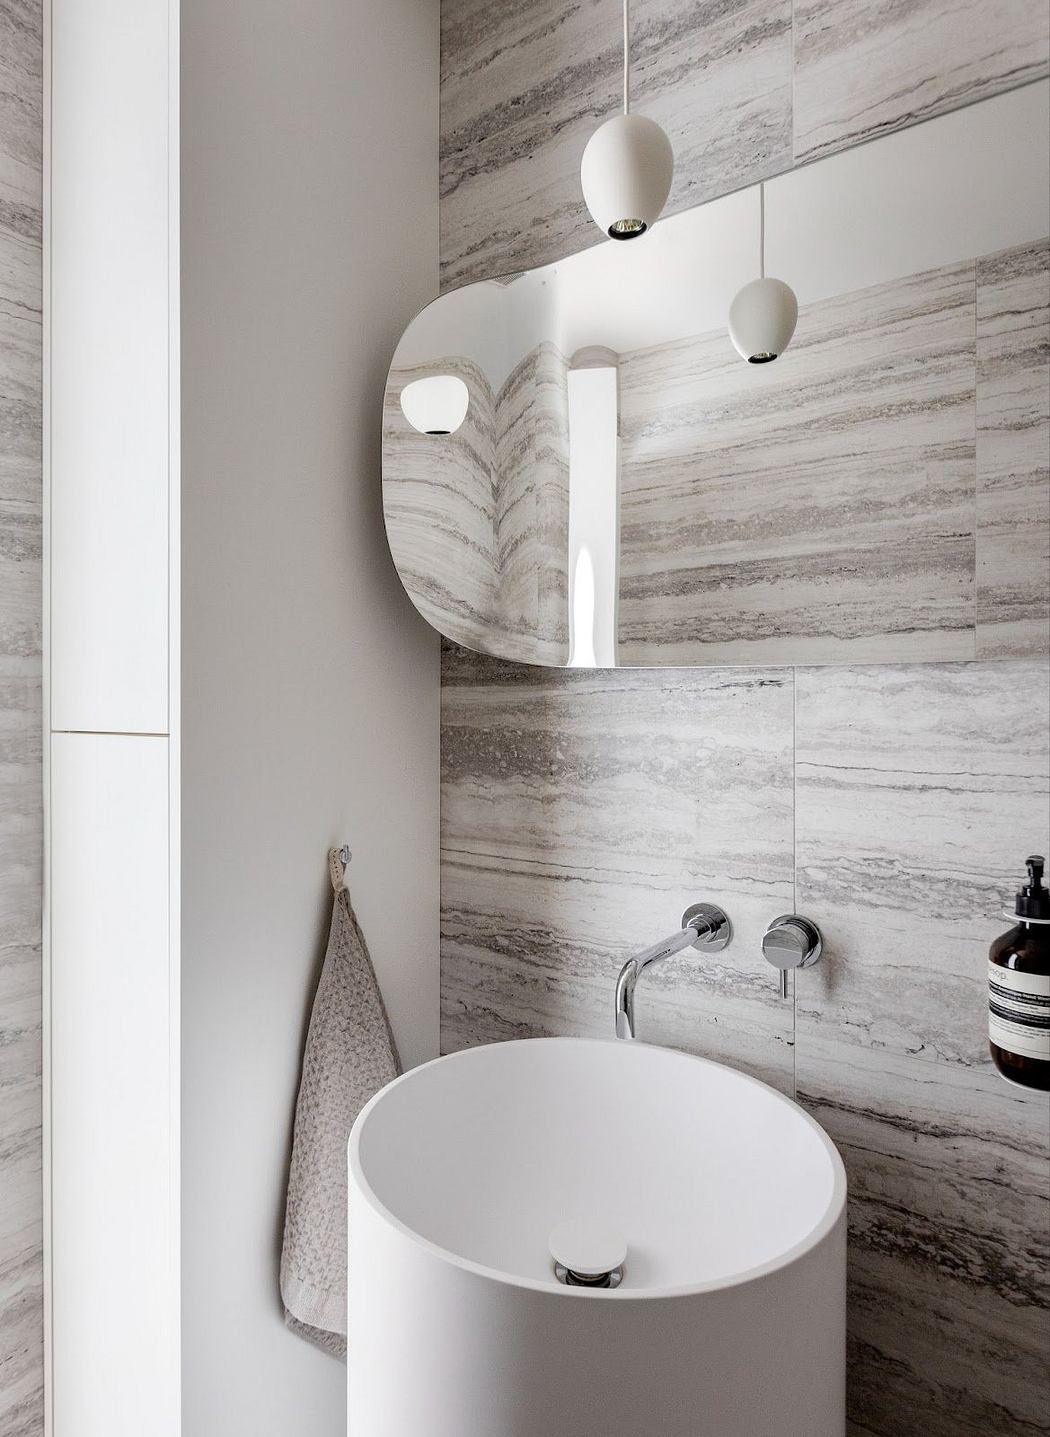 Contemporary bathroom with striped marble walls and round sink.